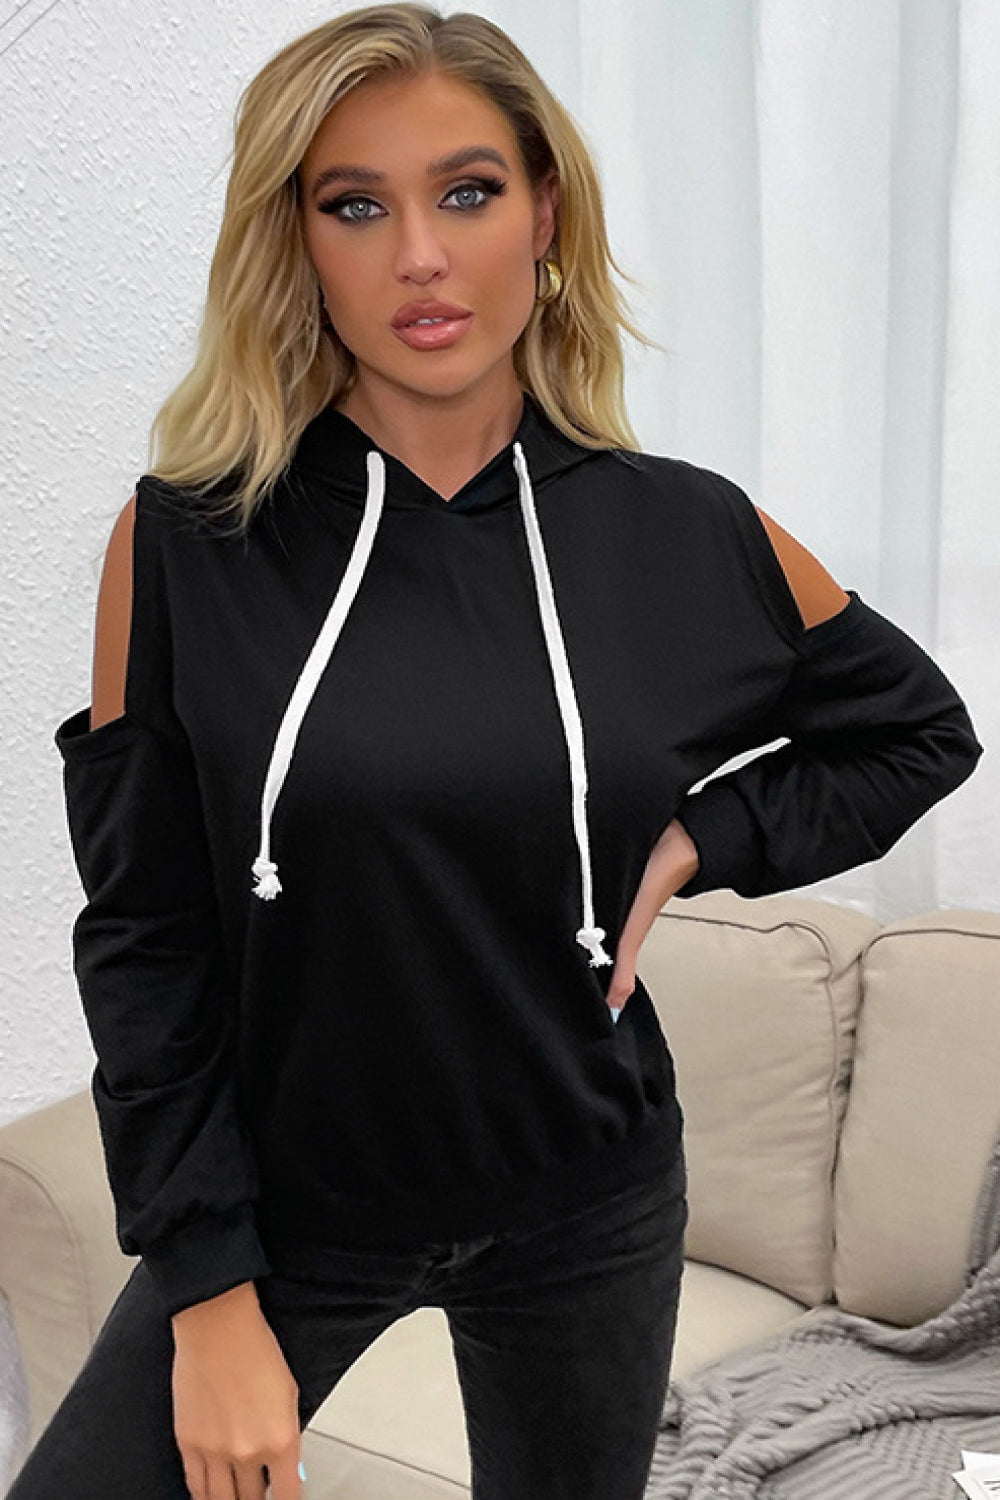 “Evening Errands” is a long sleeve top featuring colder shoulder peek-a-boo cutouts, hoodie with drawstring. Sizes medium through x-large.